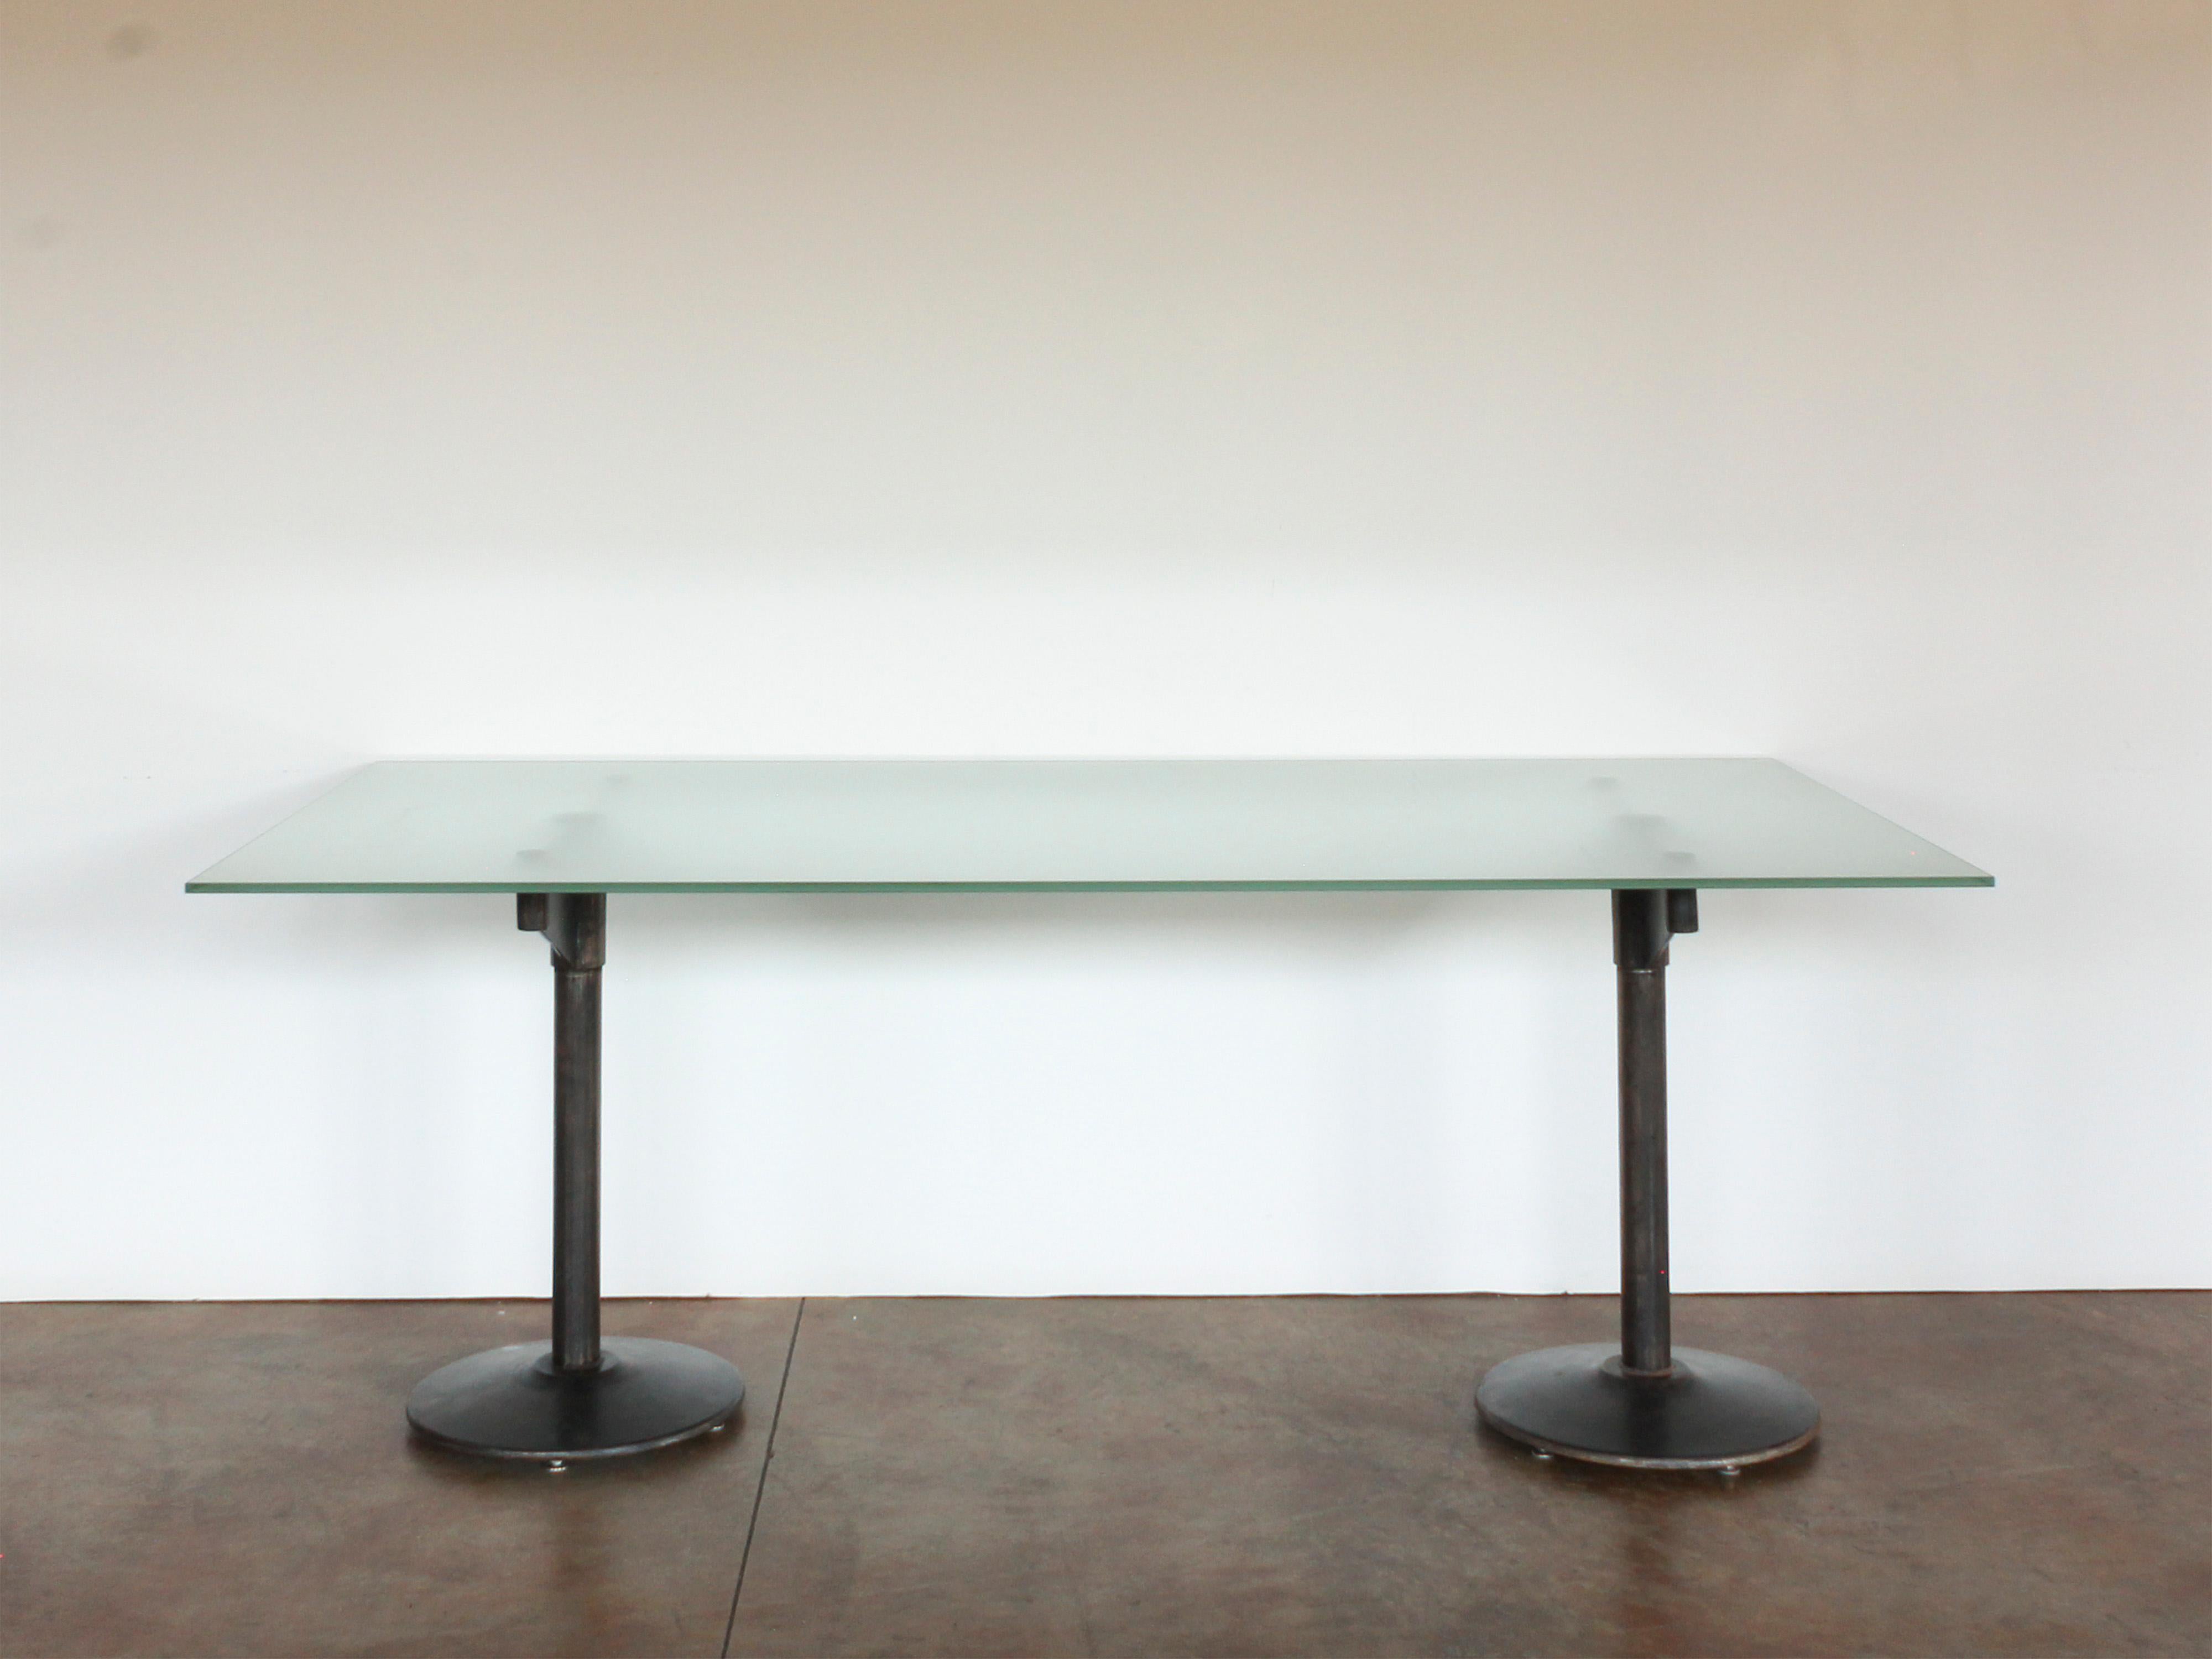 20th Century American industrial-style table on two iron pedestals with frosted glass top.